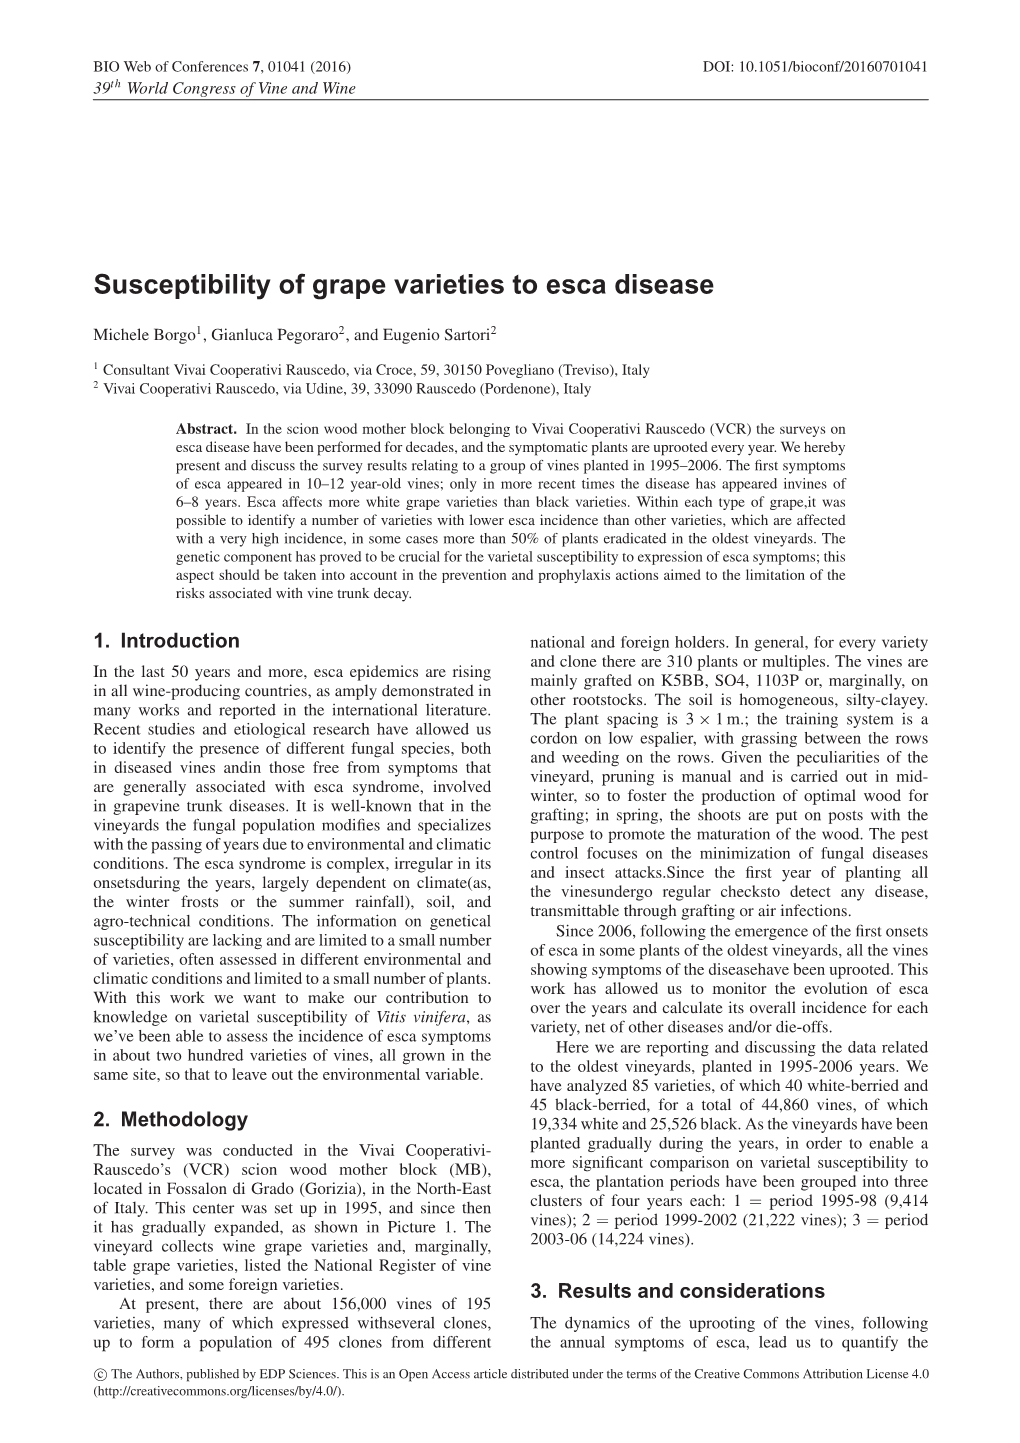 Susceptibility of Grape Varieties to Esca Disease